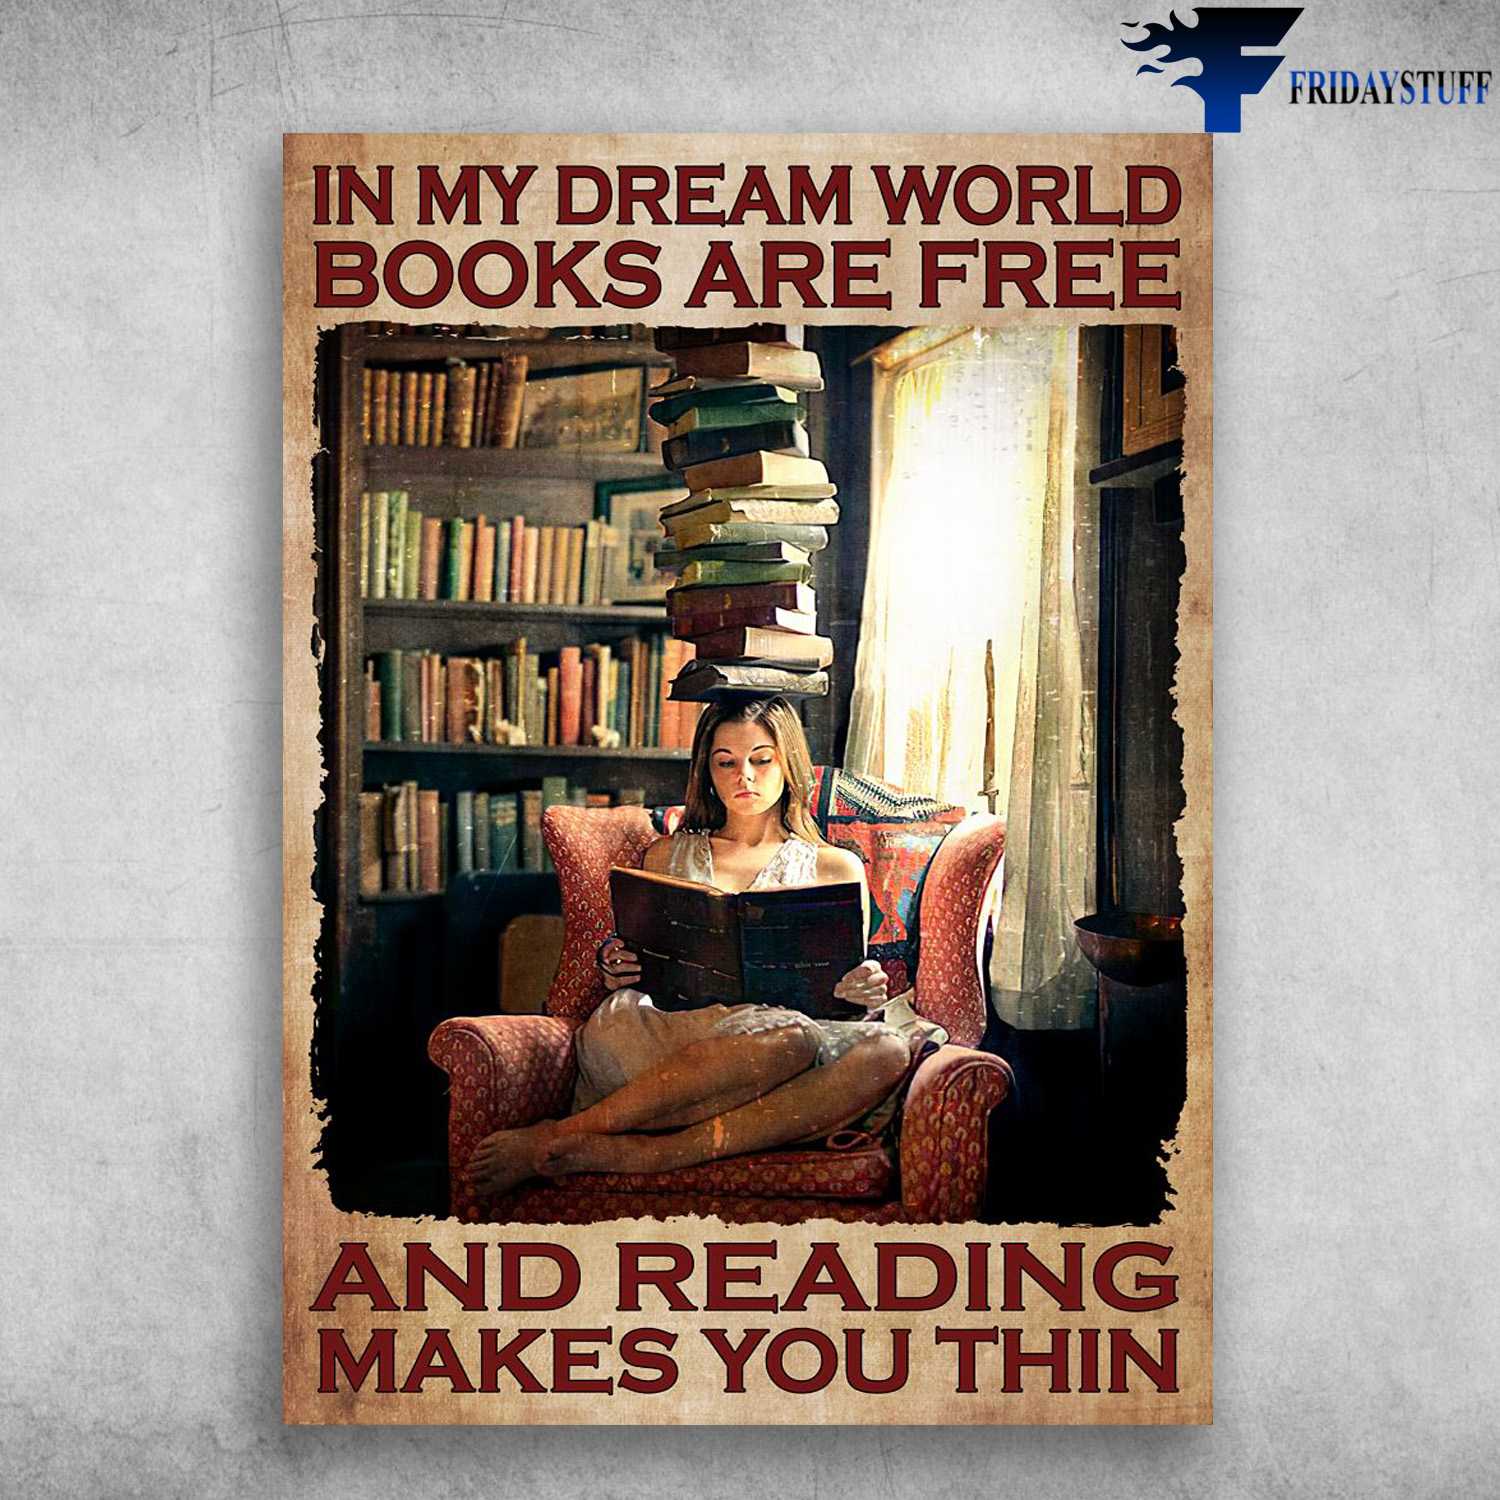 Girl Loves Book, Reading Book - In My Dream World, Book Are Free, And Reading Makes You Thin